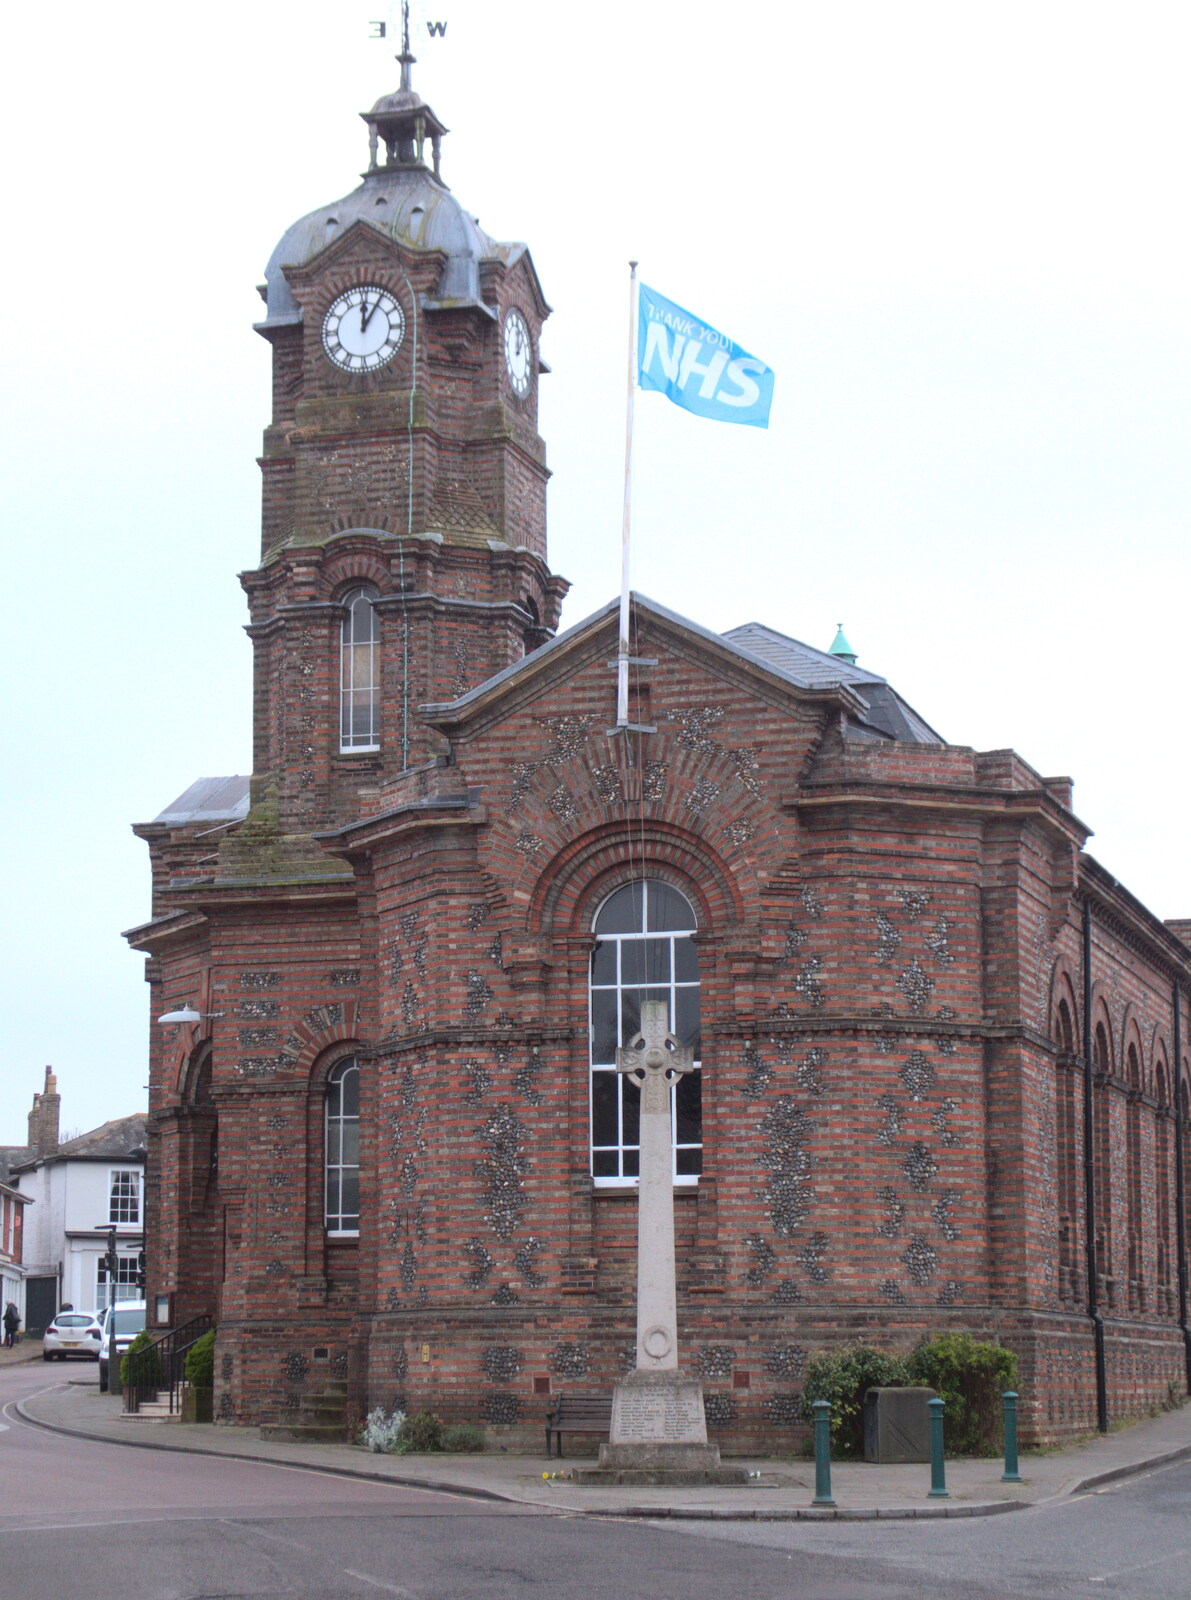 The Town Hall in Eye is flying an NHS flag from The Lockdown Desertion of Diss, and a Bike Ride up the Avenue, Brome - 19th April 2020